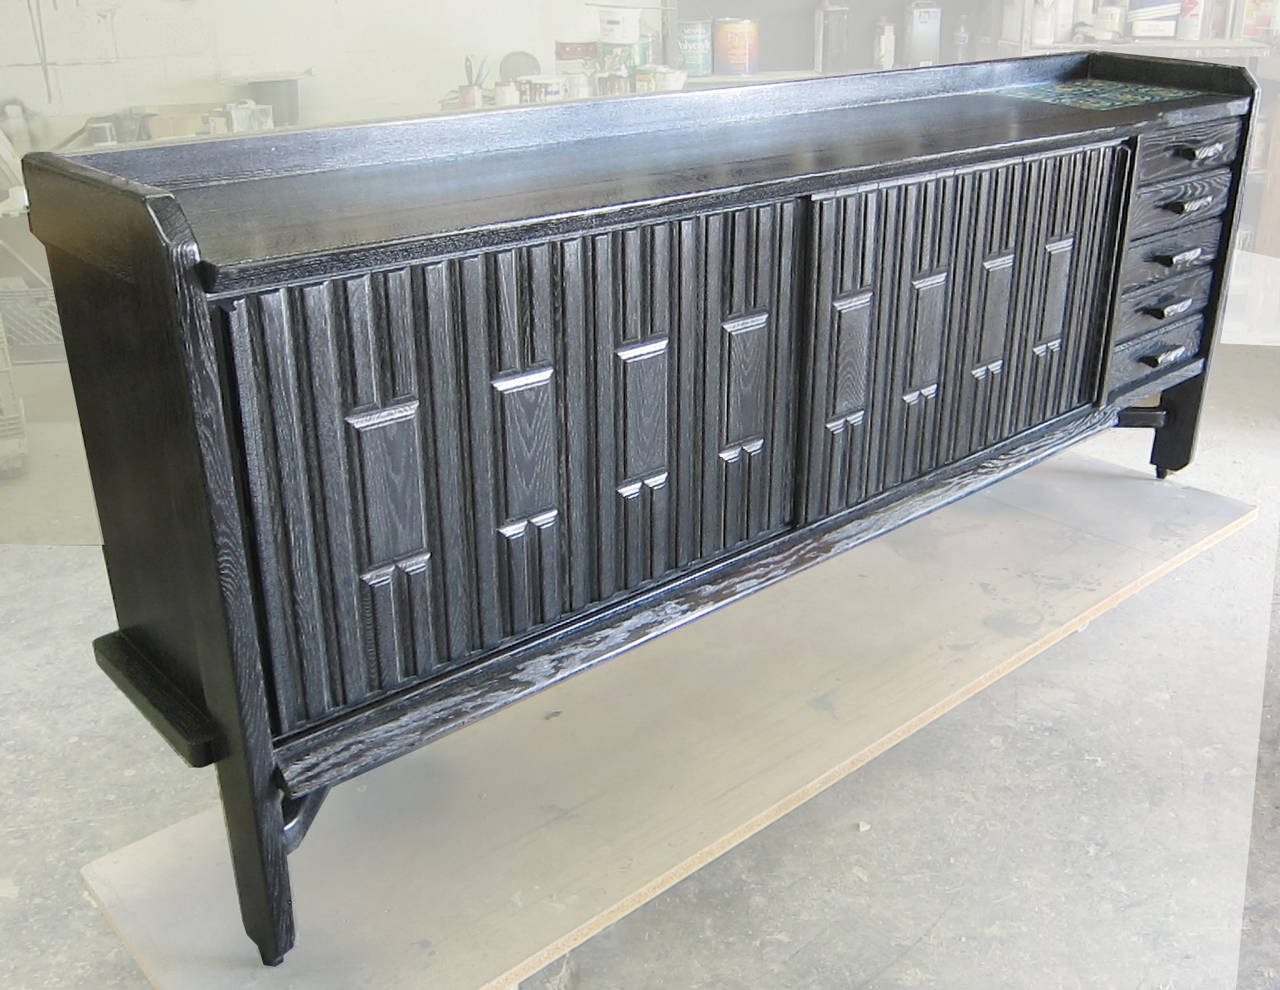 A French 1950s sideboard by Guillerme and Chambron for Votre Maison. Black cerused oak patina with ceramic tiles inlaid on top, two front sliding doors revealing fixed glass shelves on either side. Five drawers with black ceramic pulls.

.